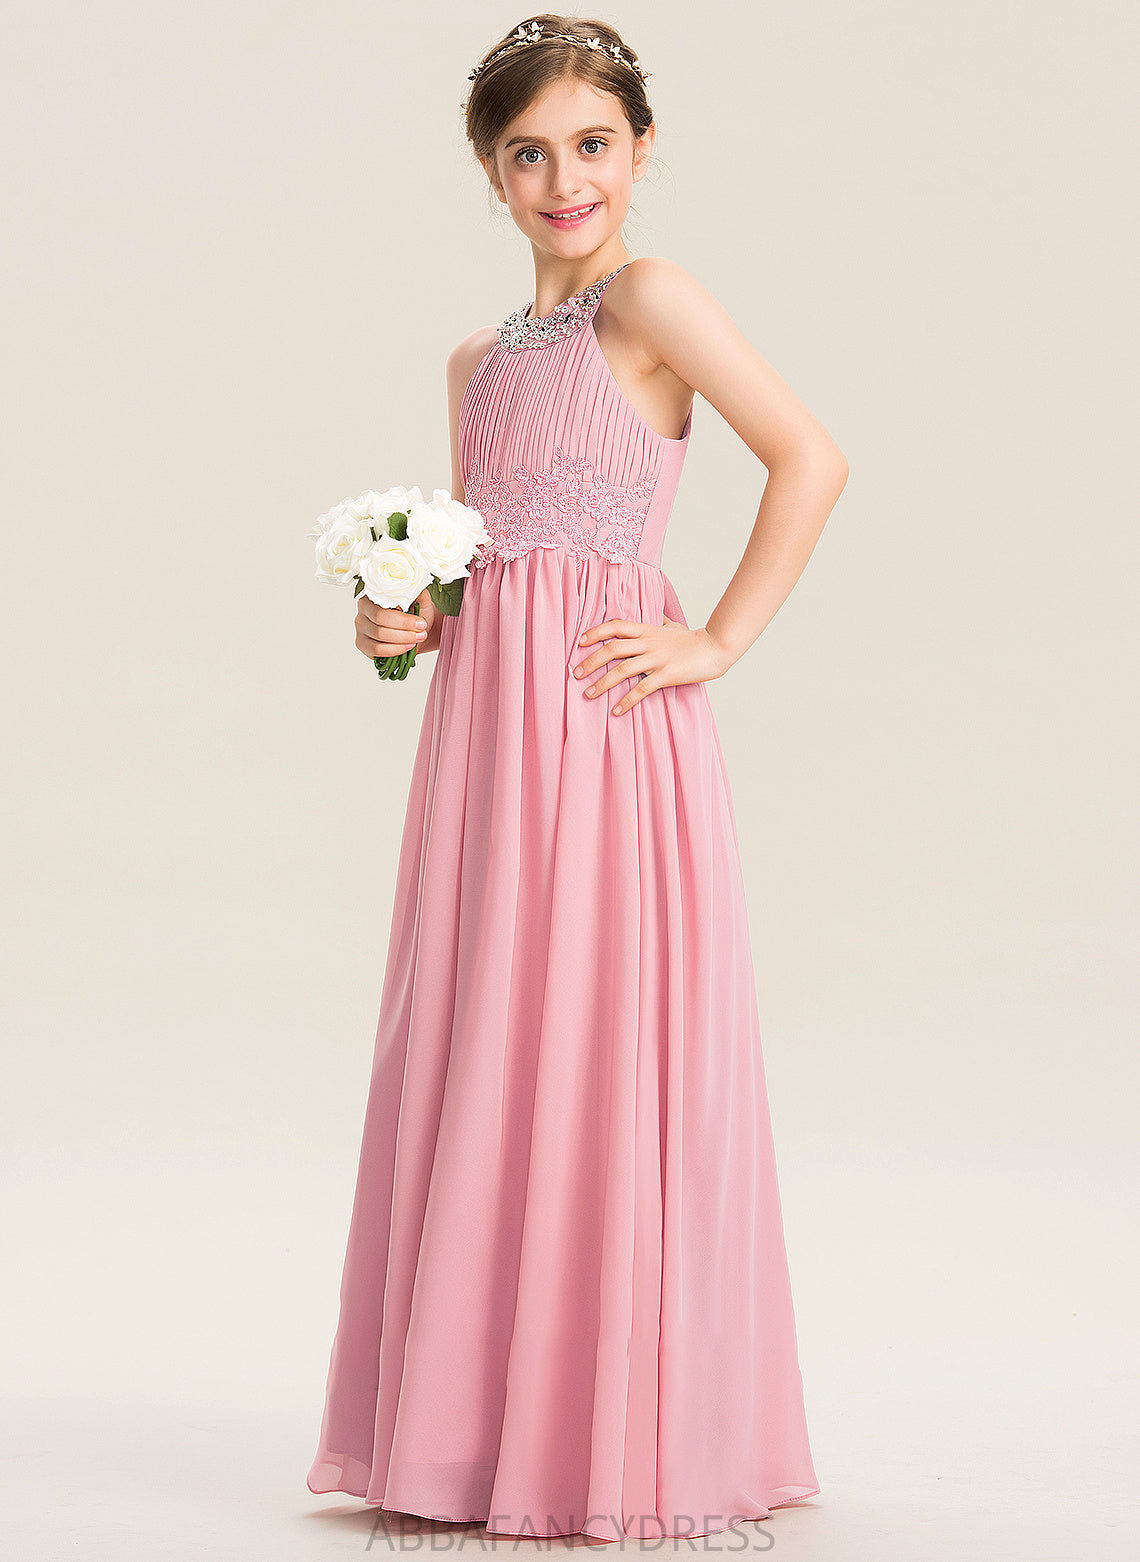 Scoop Sequins Lace With Beading Junior Bridesmaid Dresses Floor-Length Ruffle A-Line Chiffon Hayden Neck